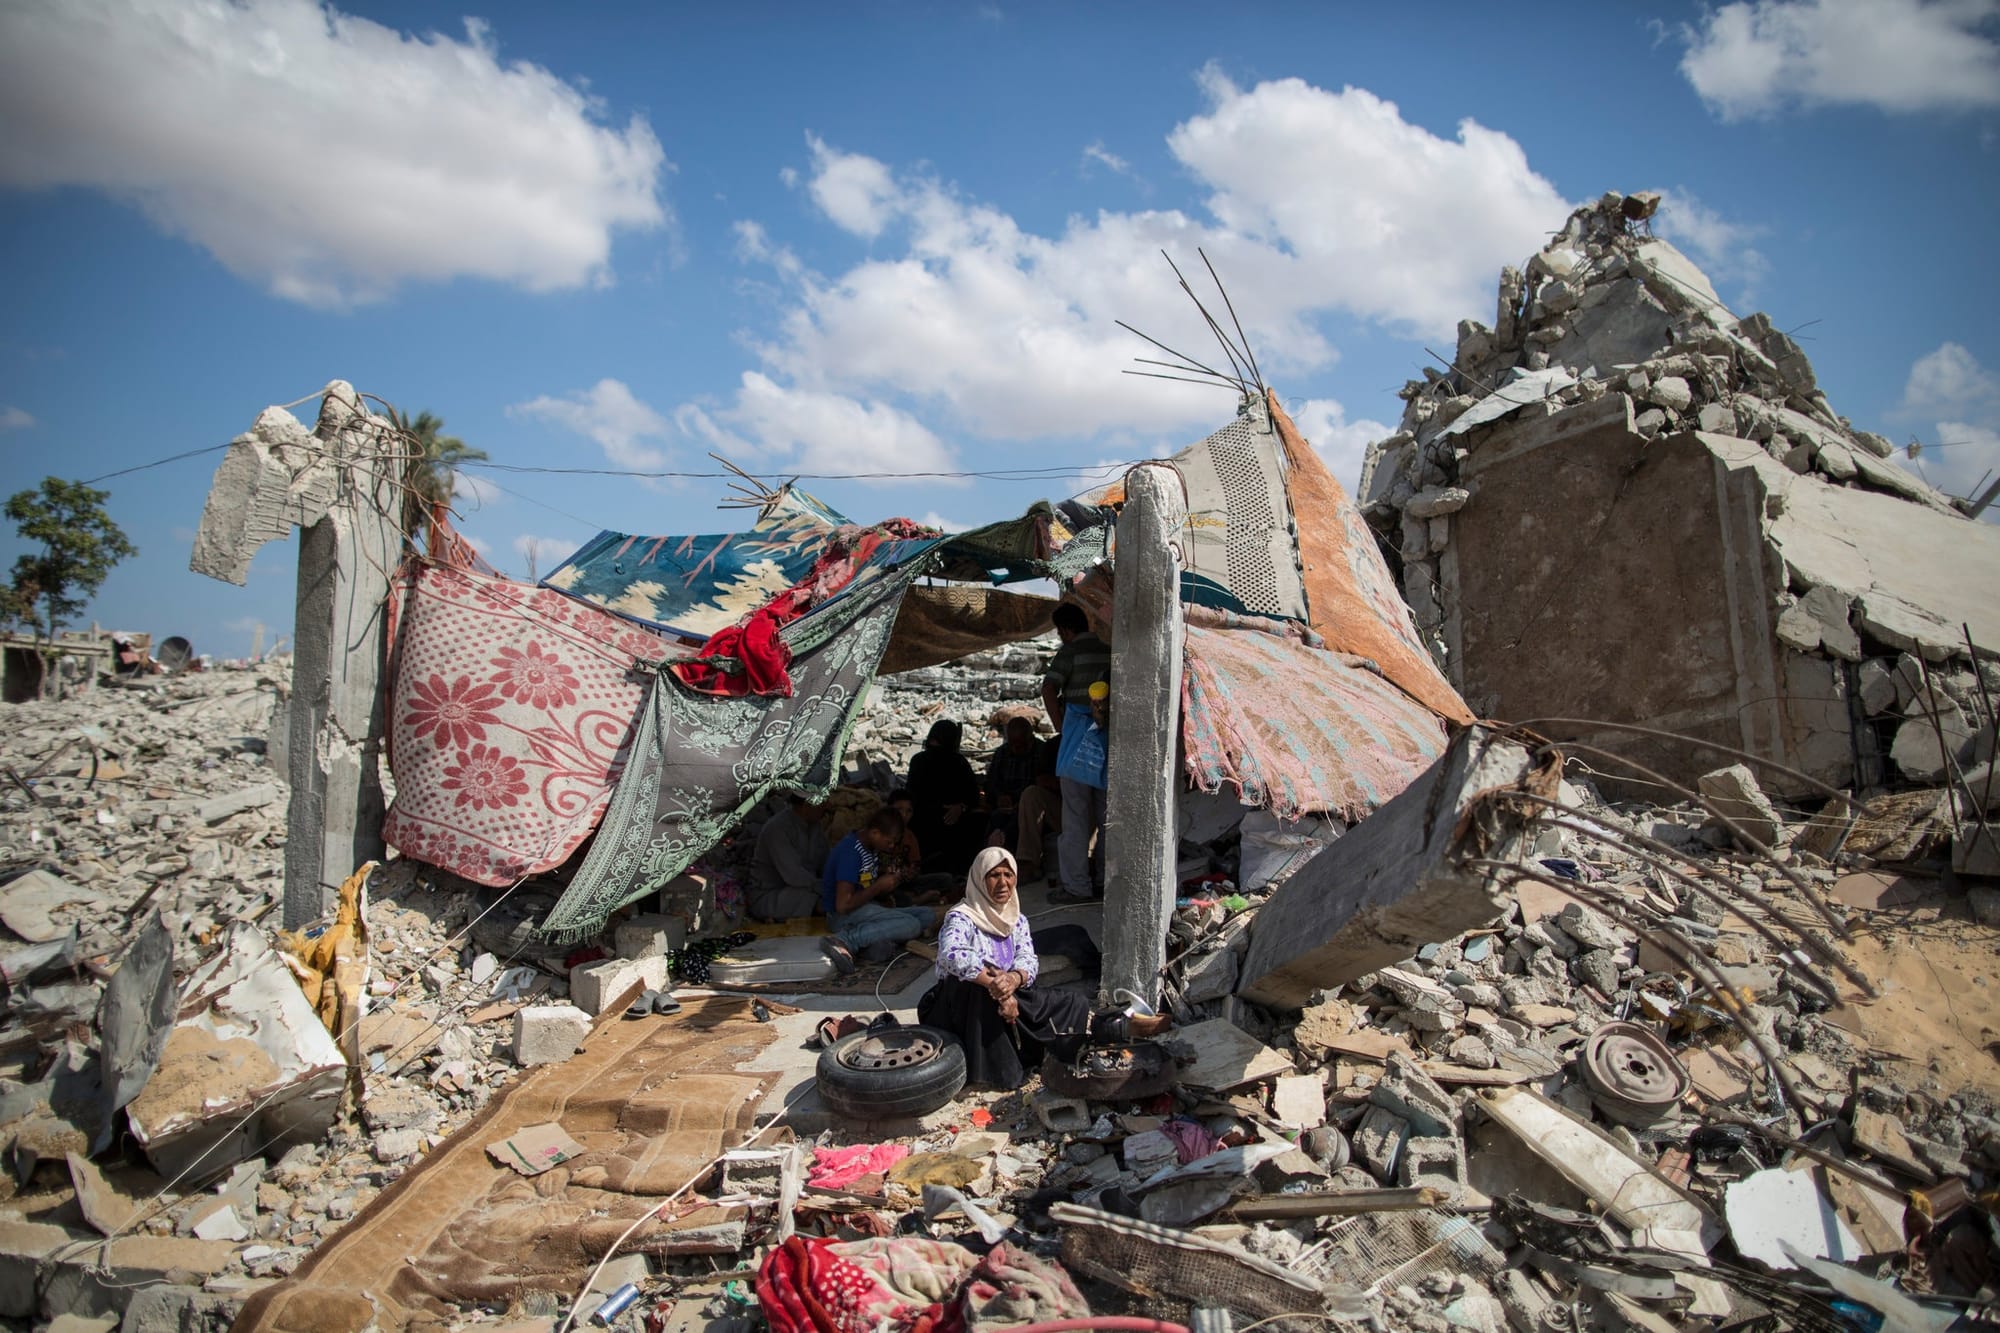 A woman in a headcarf crouches beofre a makeshift shelter of blankets and rugs, a tent built on a mound of rubble in the remains of a building in gaza.